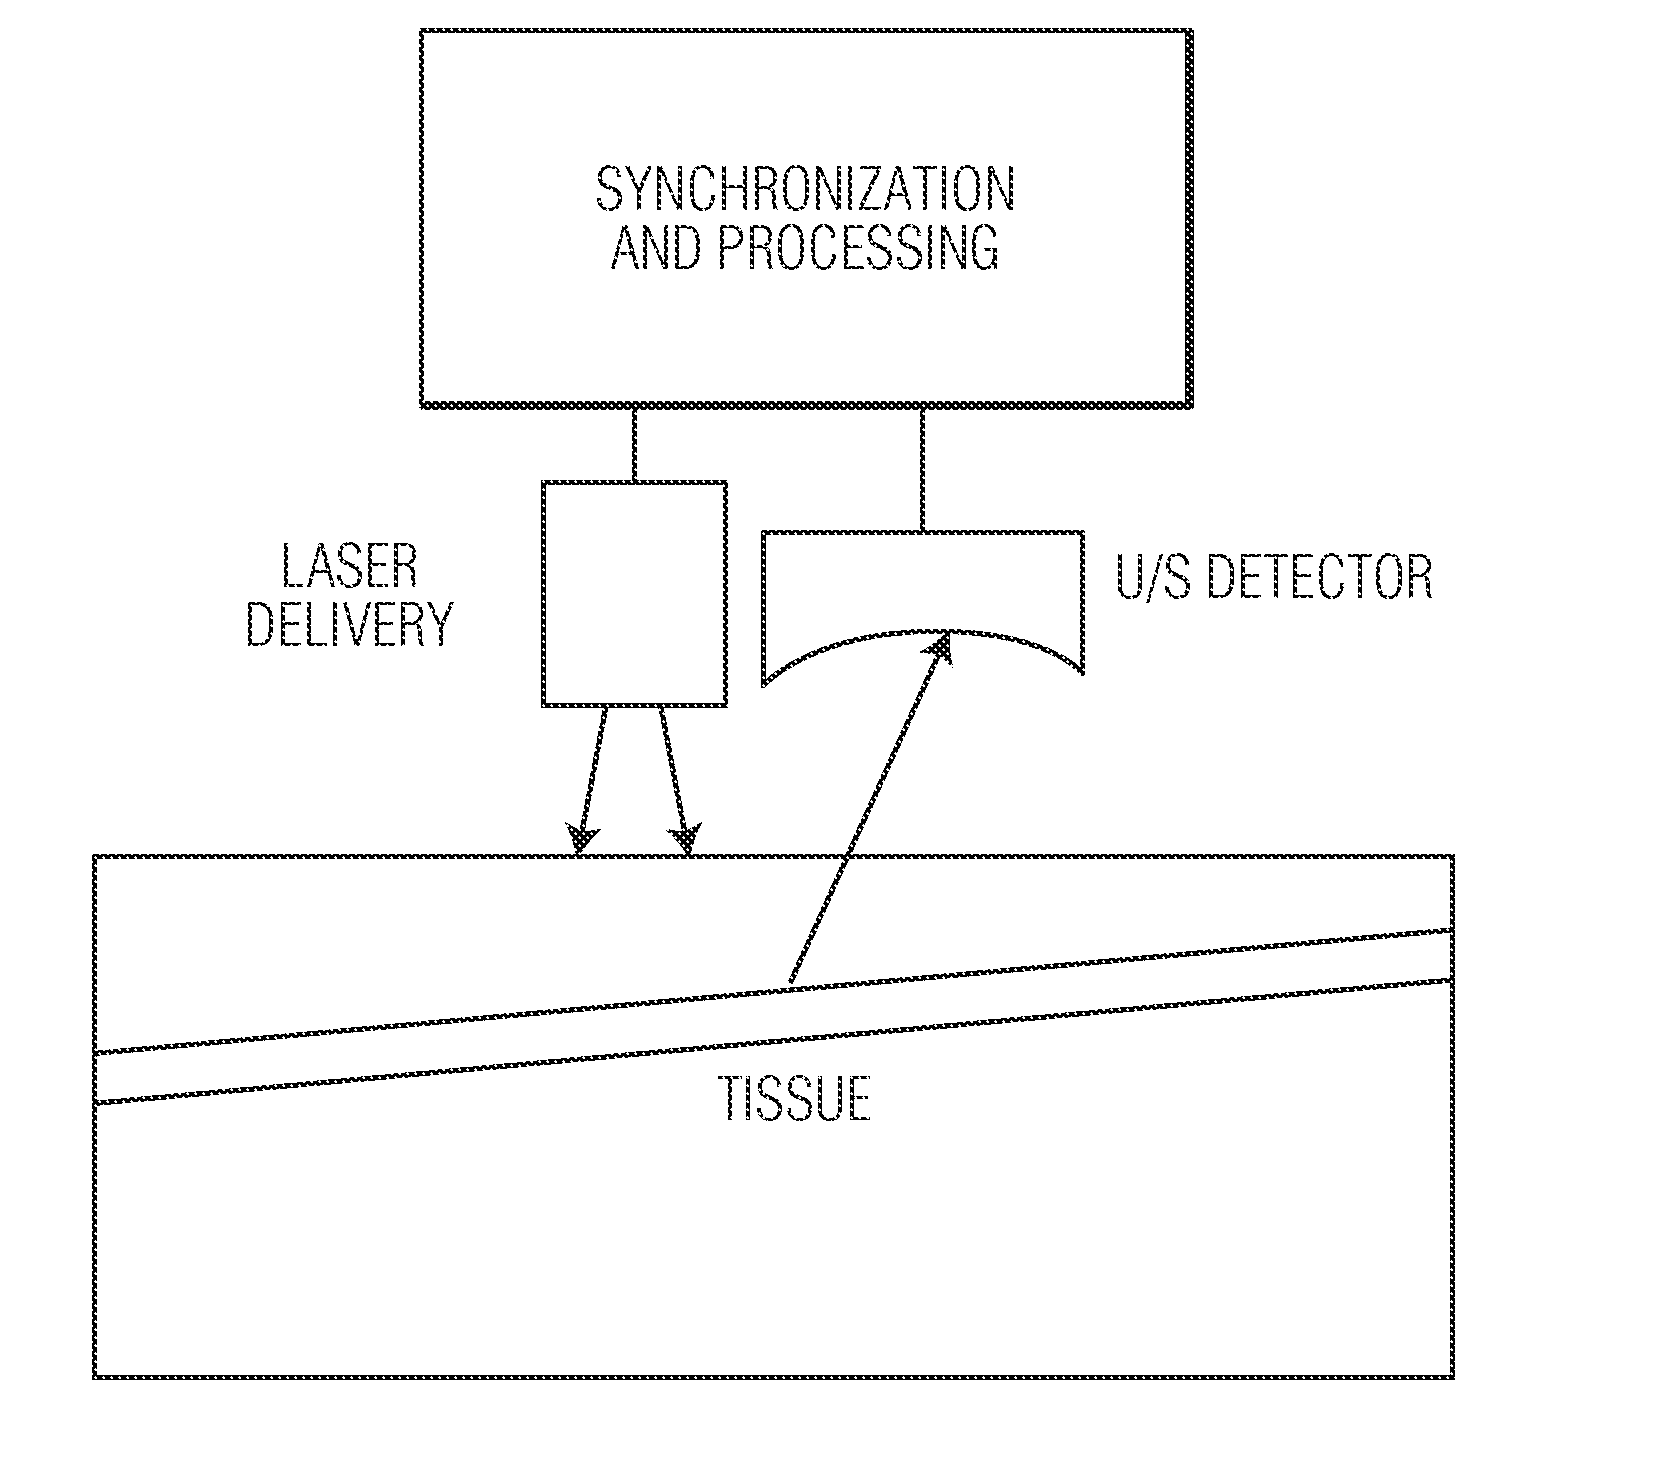 Systems and methods for detecting flow and enhancing snr performance in photoacoustic imaging applications